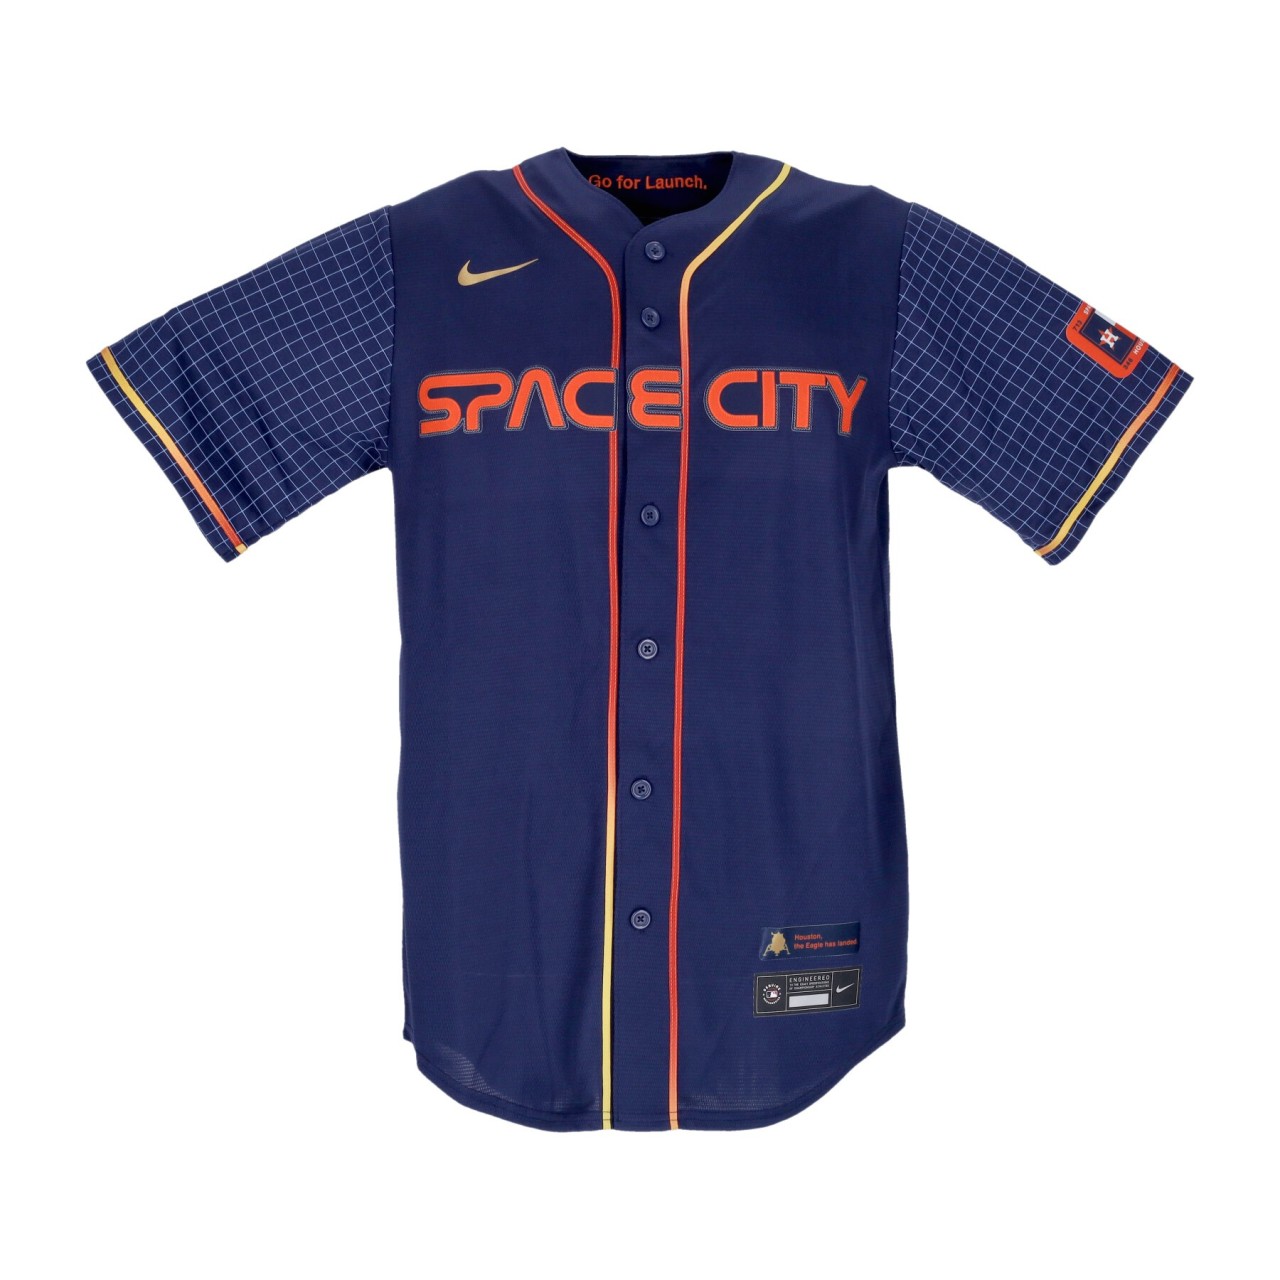 NIKE MLB MLB OFFICIAL REPLICA JERSEY CITY CONNECT HOUAST T770-HUCC-HUS-KMG